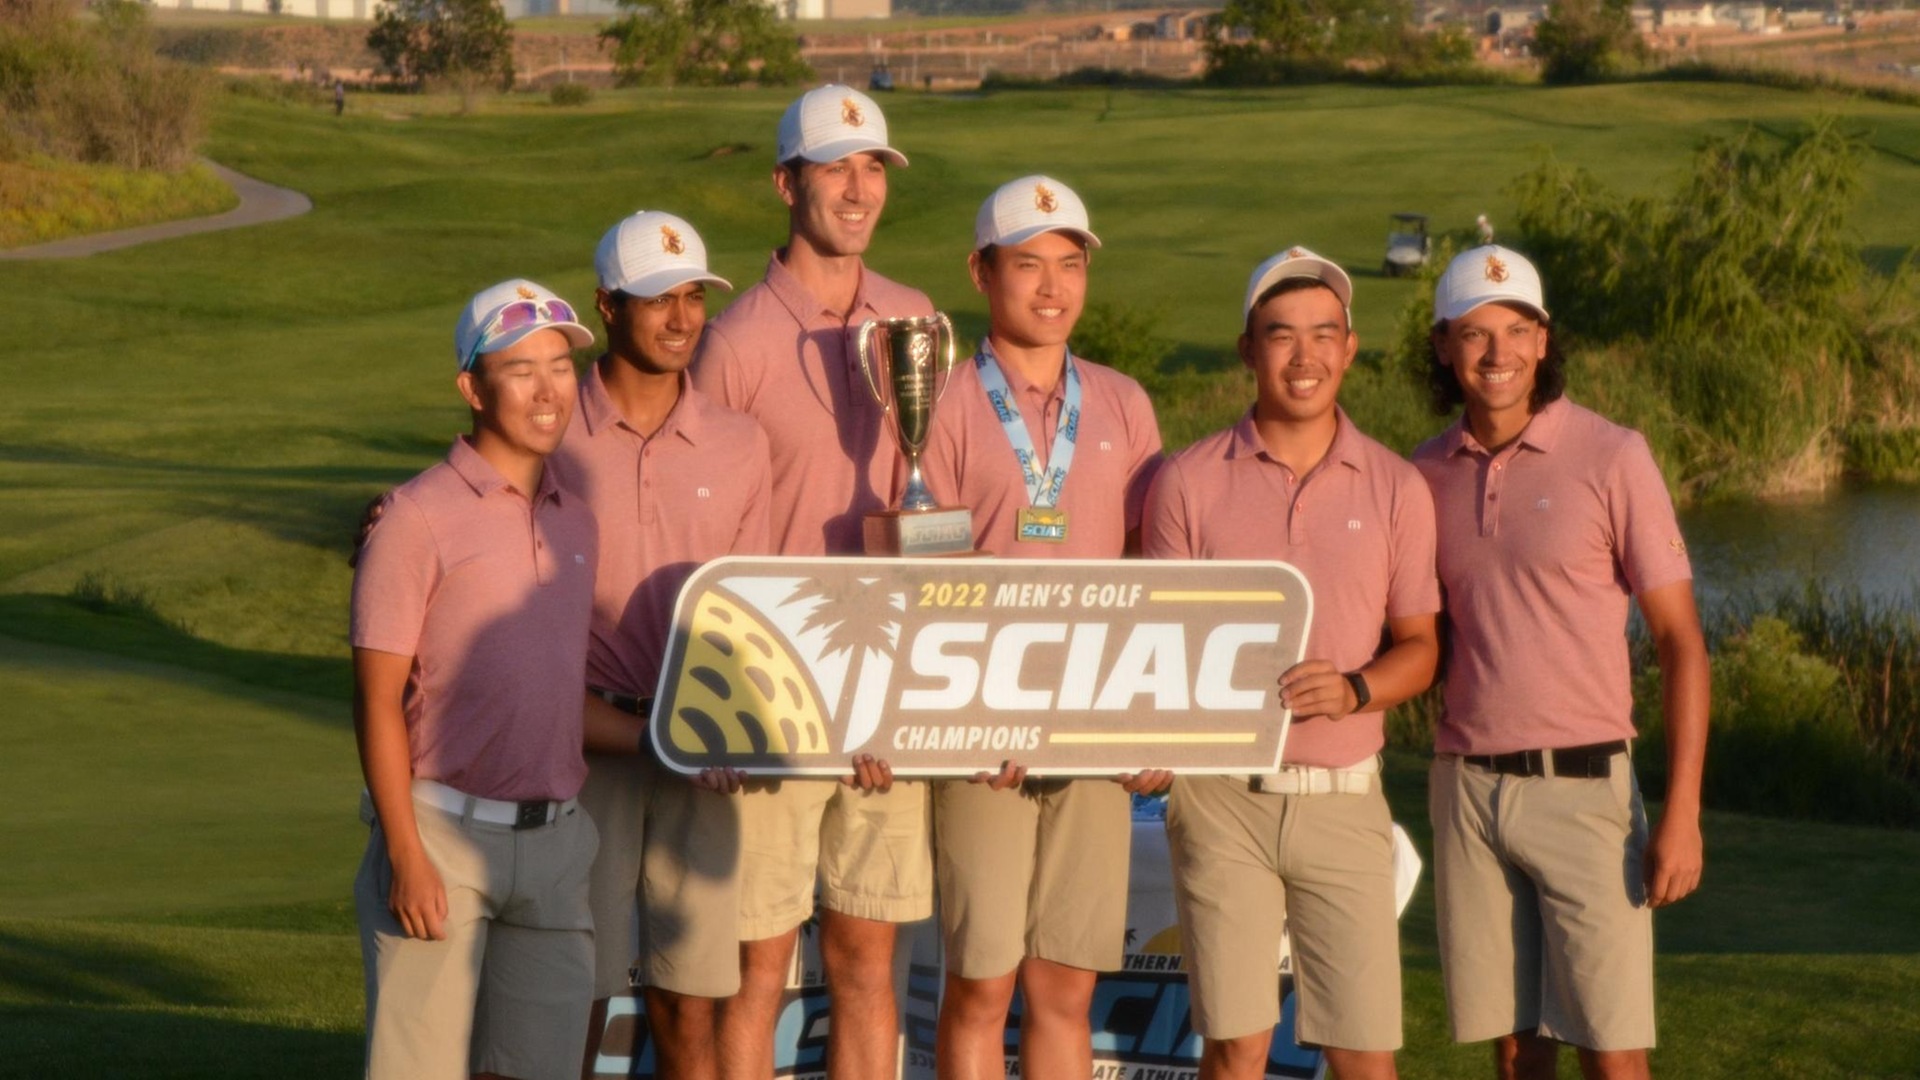 CMS will try to defend its SCIAC title this season